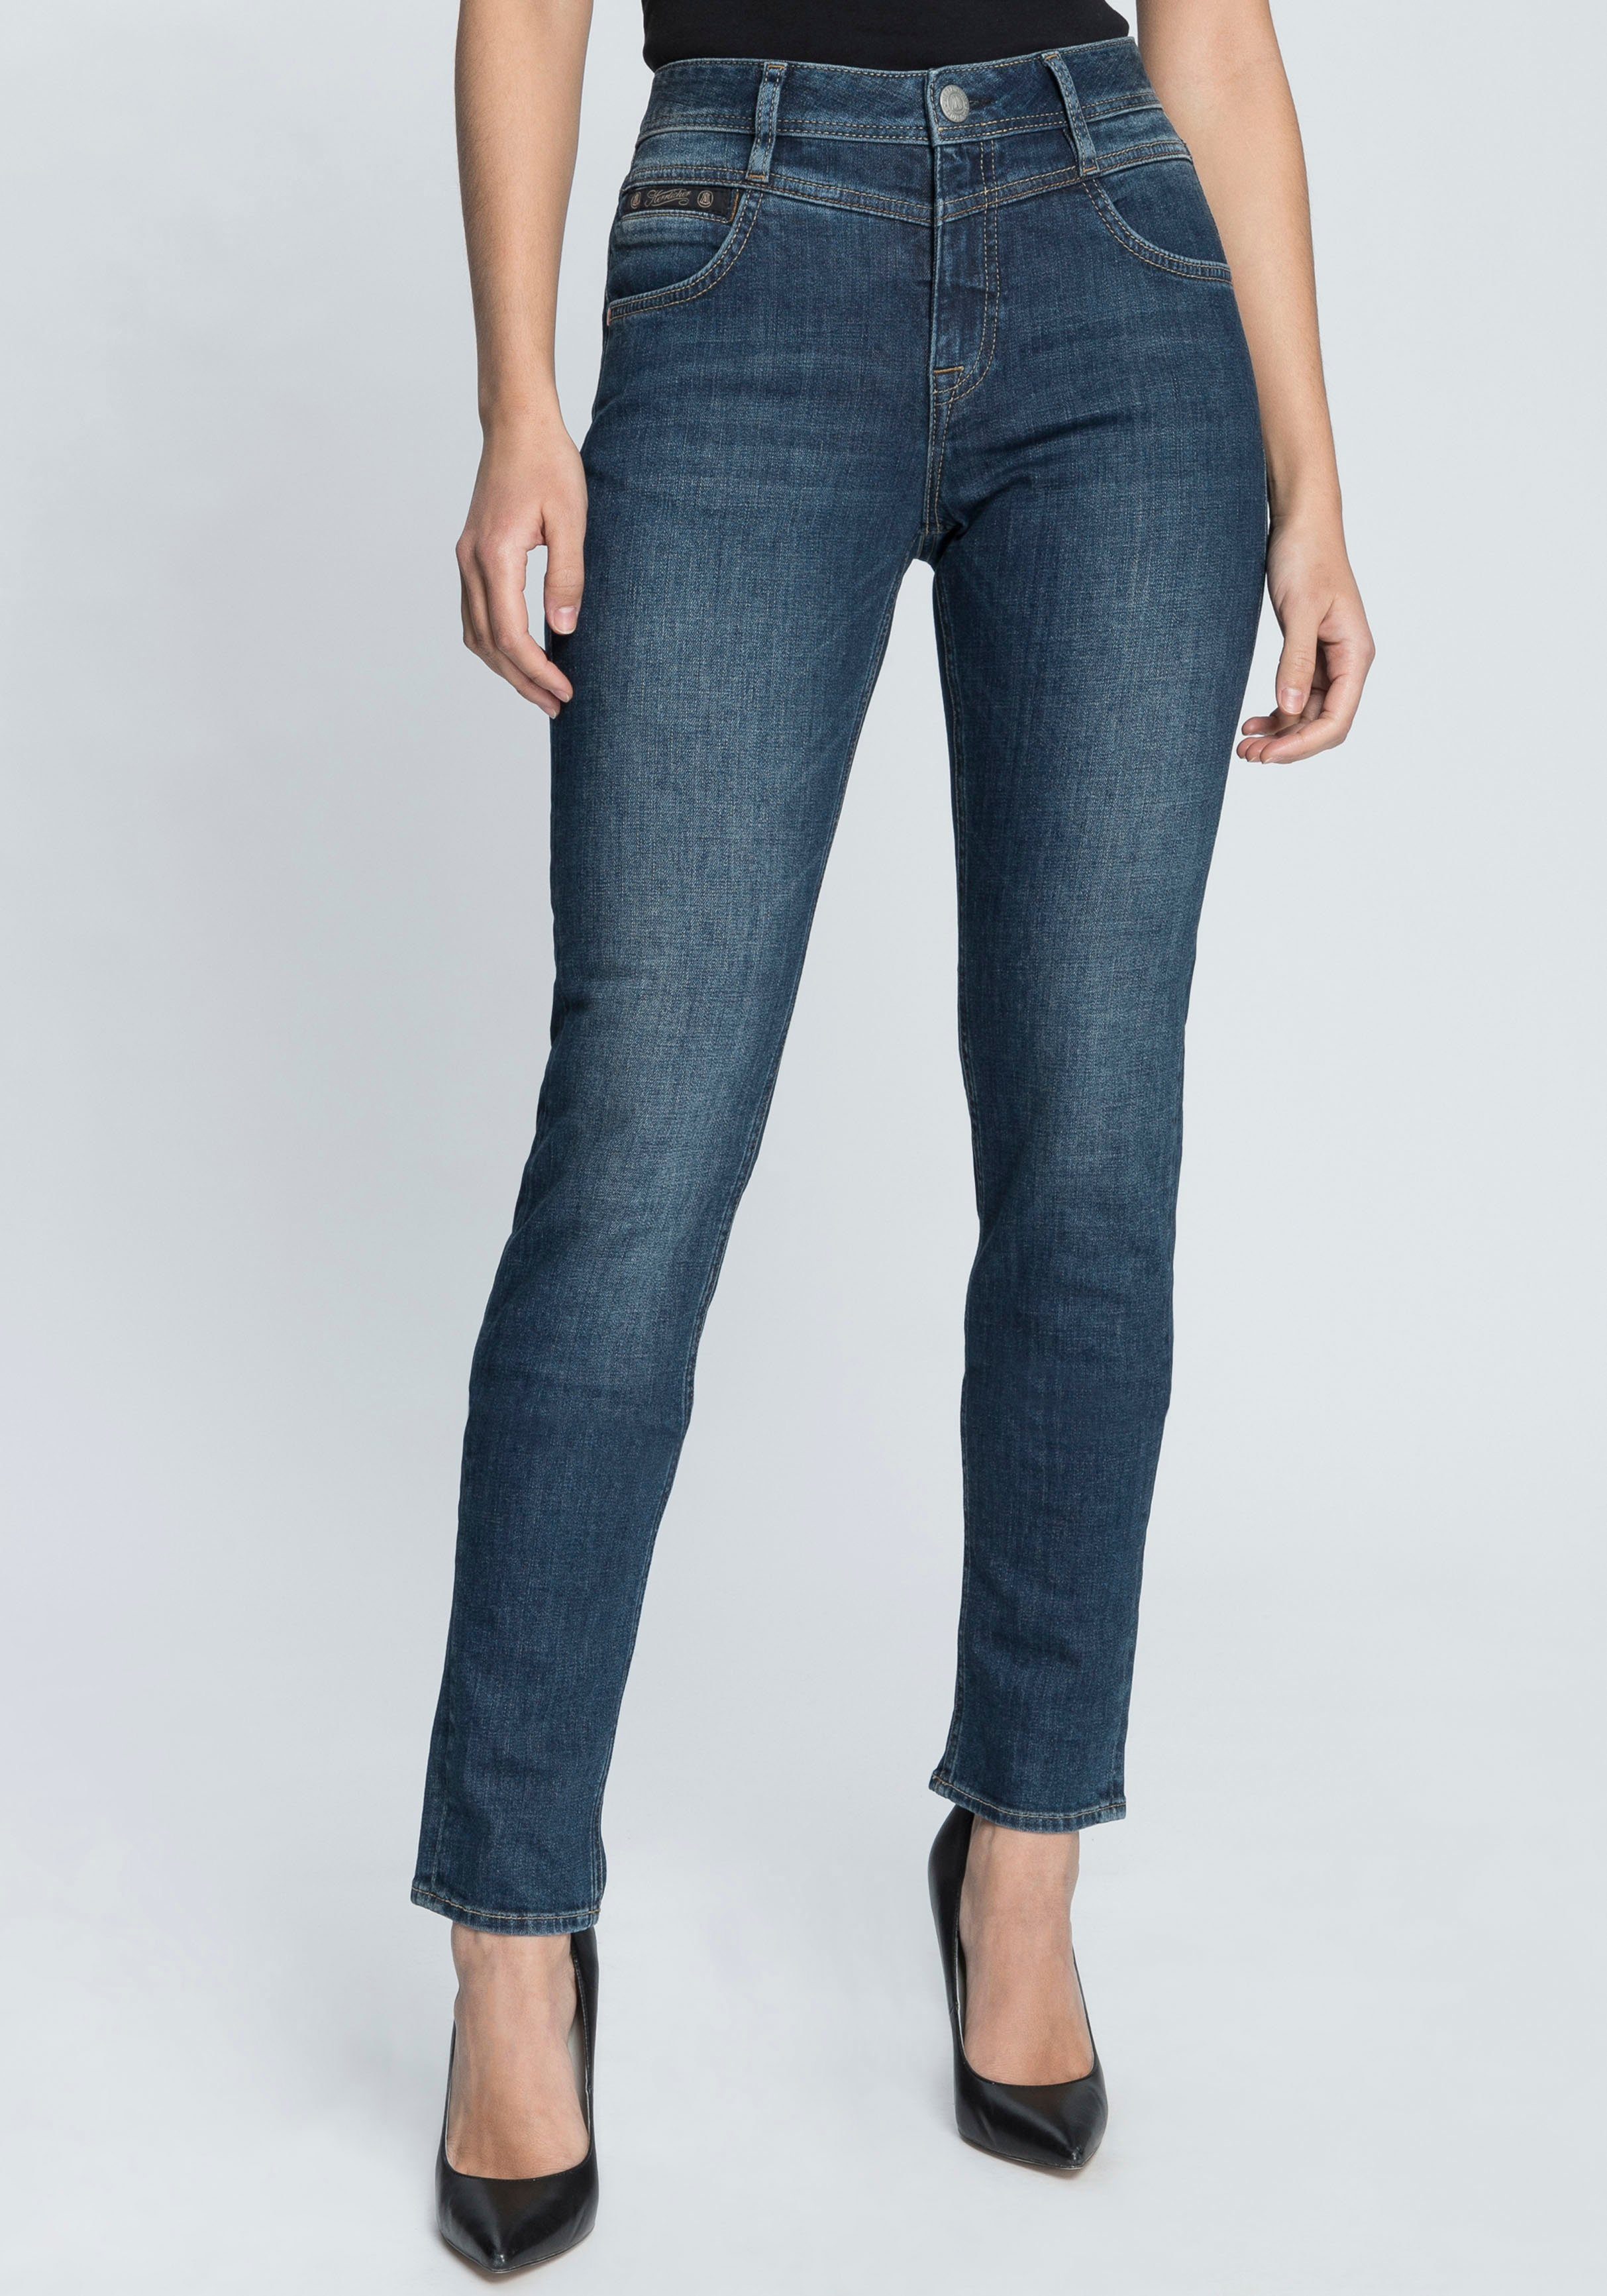 Polyester Herrlicher SLIM PEPPY used 034 Recycled Slim-fit-Jeans DENIM Waist Normal RECYCLED